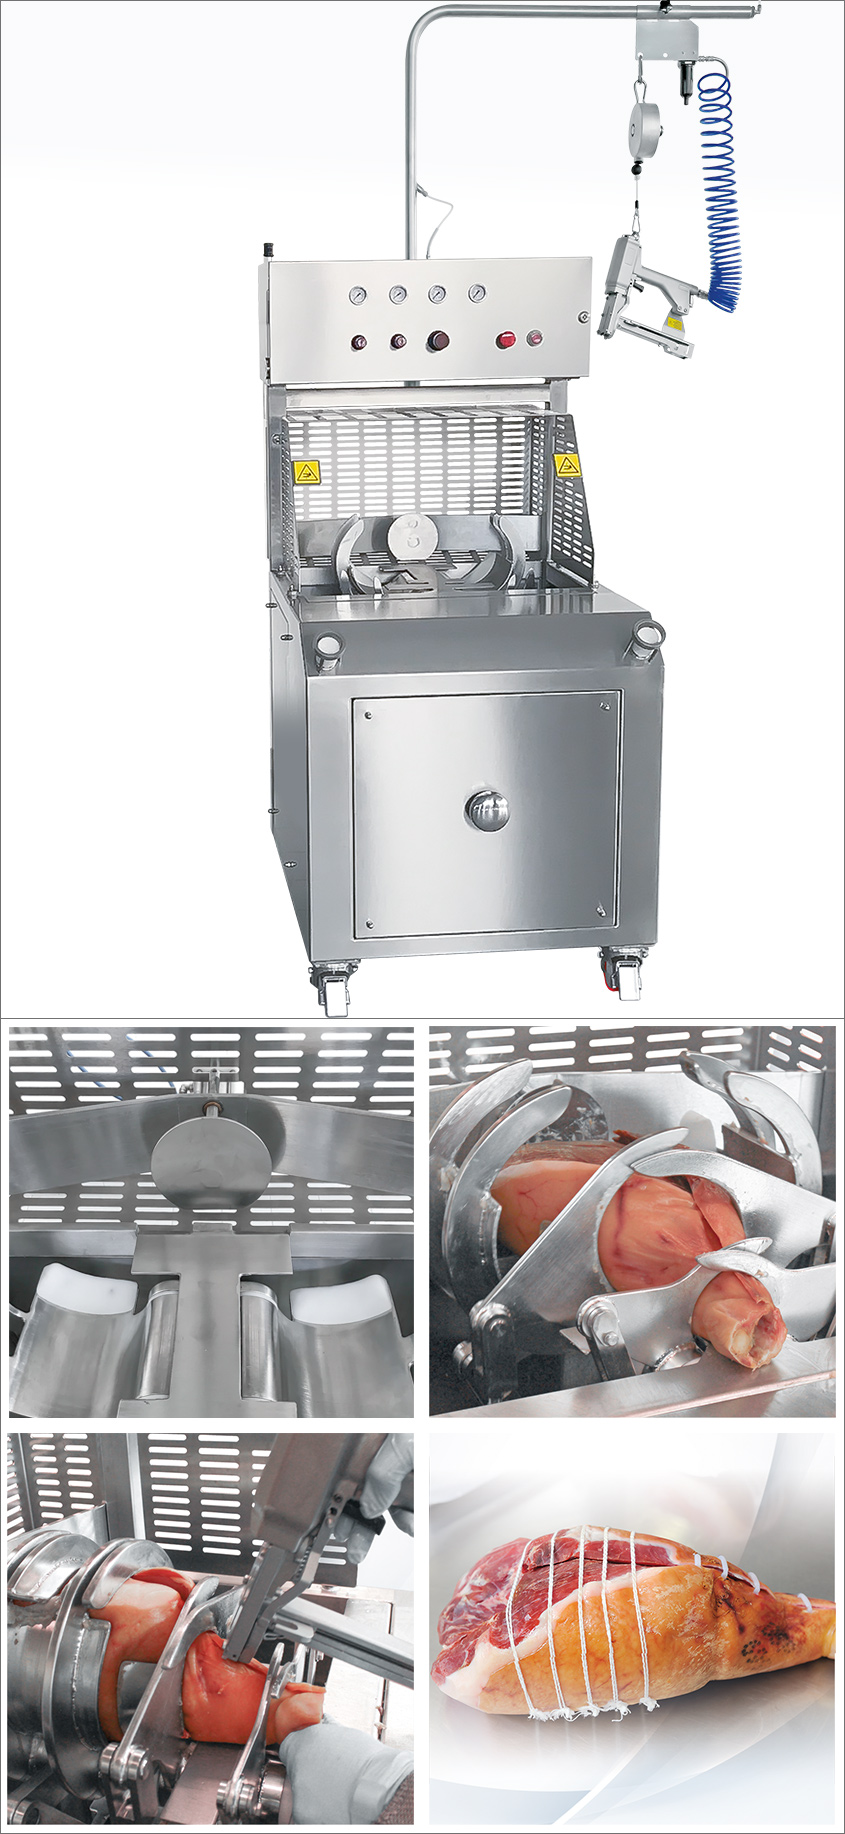 Semi-automatic machine suitable for forming boned raw hams